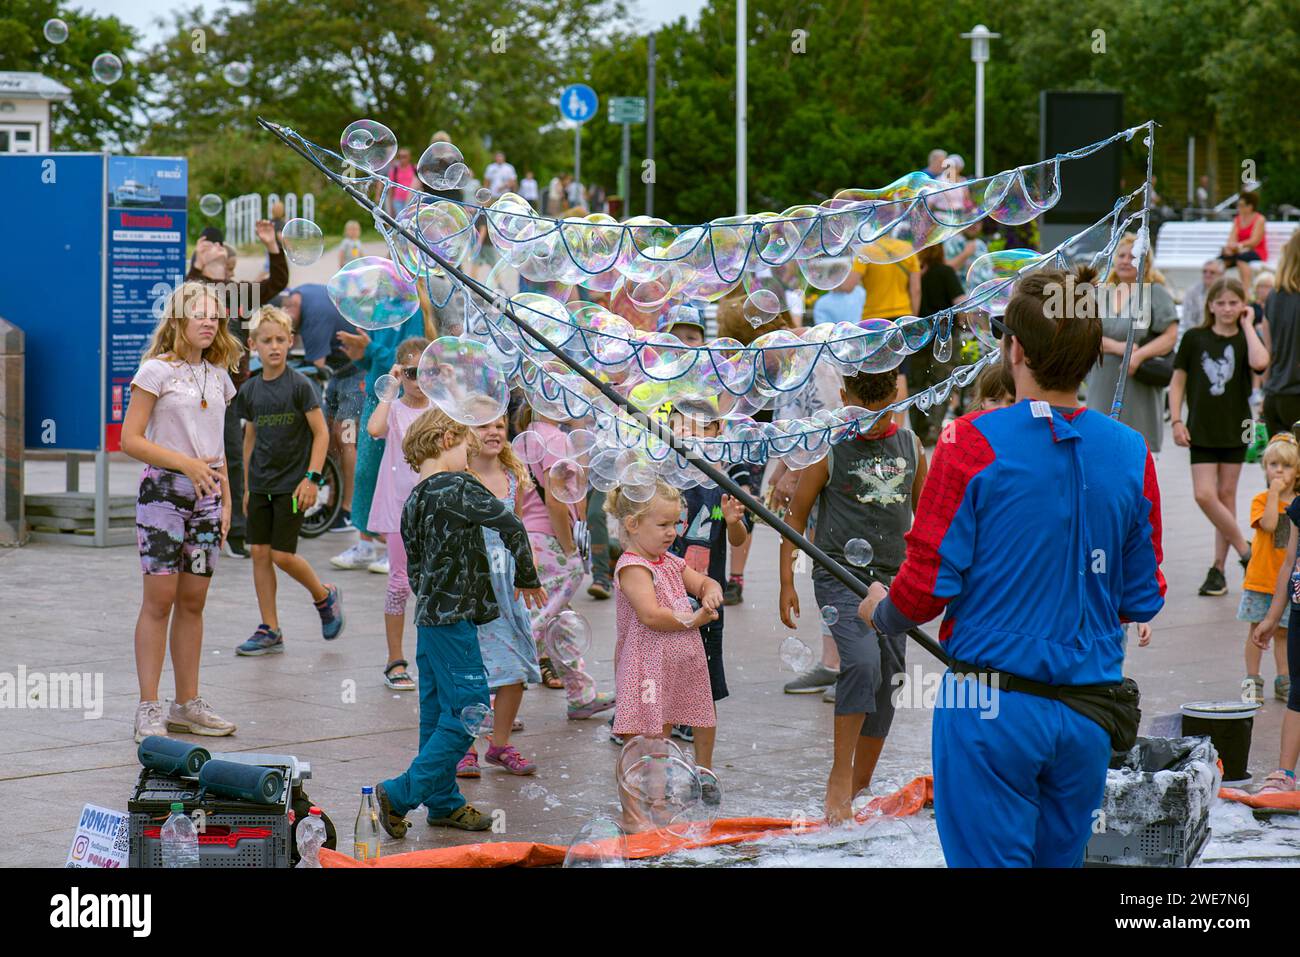 Man demonstrates soap bubbles to children on the promenade of Kuehlungsborn, Mecklenburg-Vorpommern, Germany Stock Photo